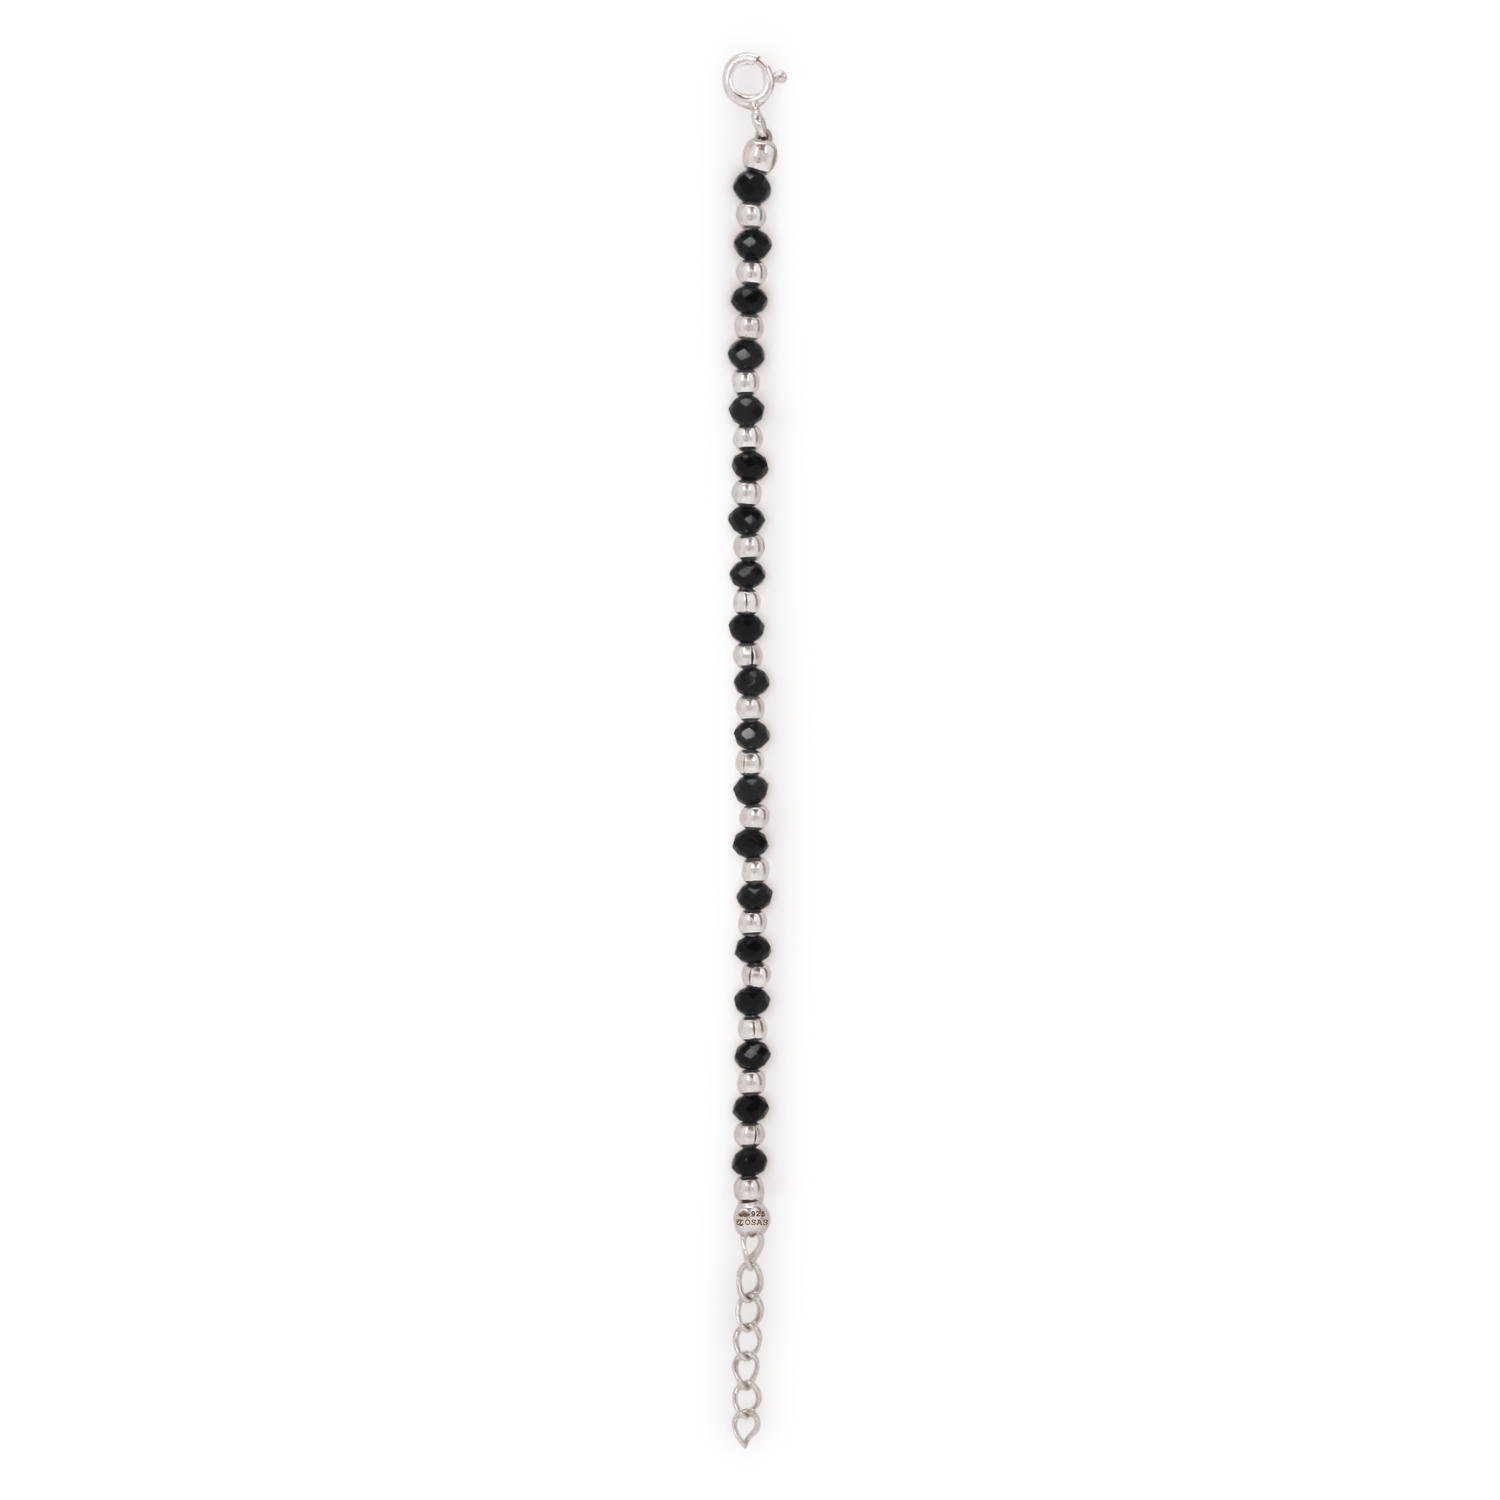 Black MOTI Bracelet with Charm for Men and Women - The Bling Stores LLP -  3268760